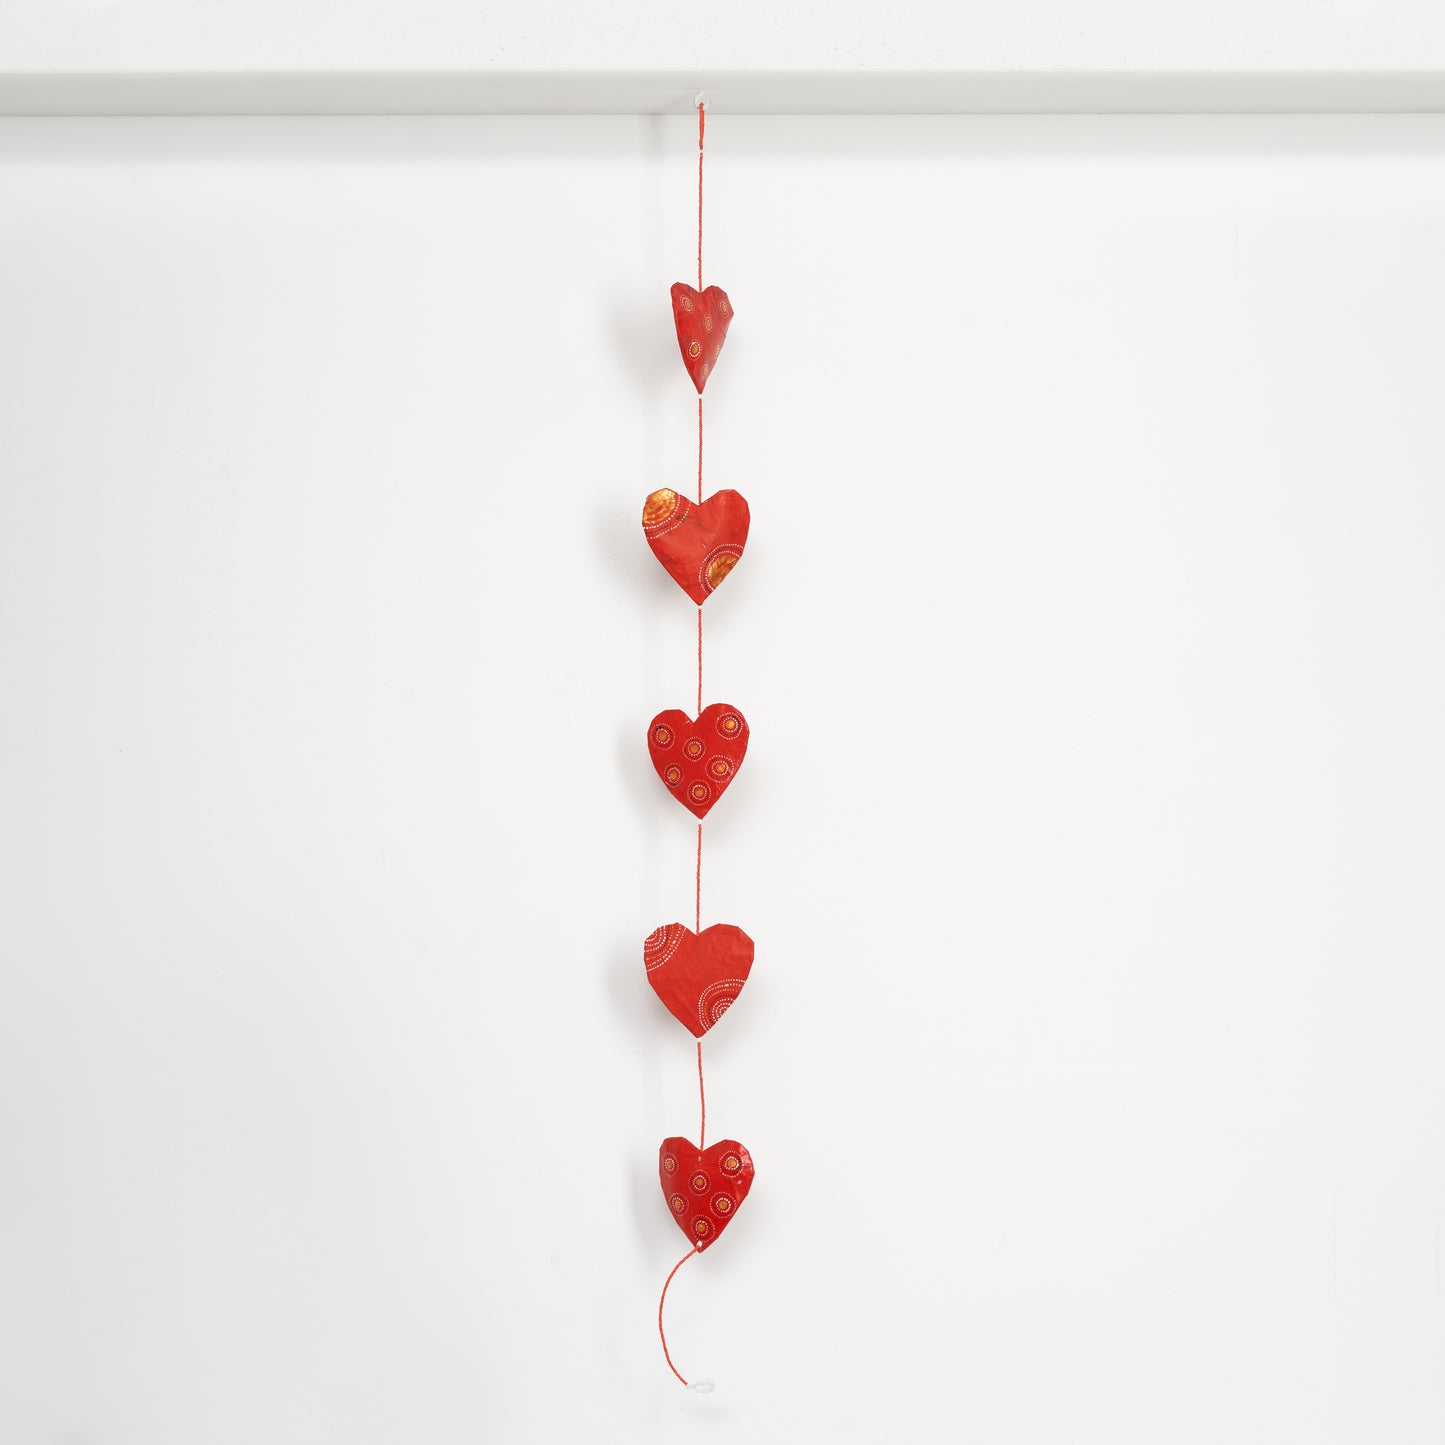 Garland / Mobilé "Hearts" made of papier-mâché from recycled paper | Upcycling, handmade